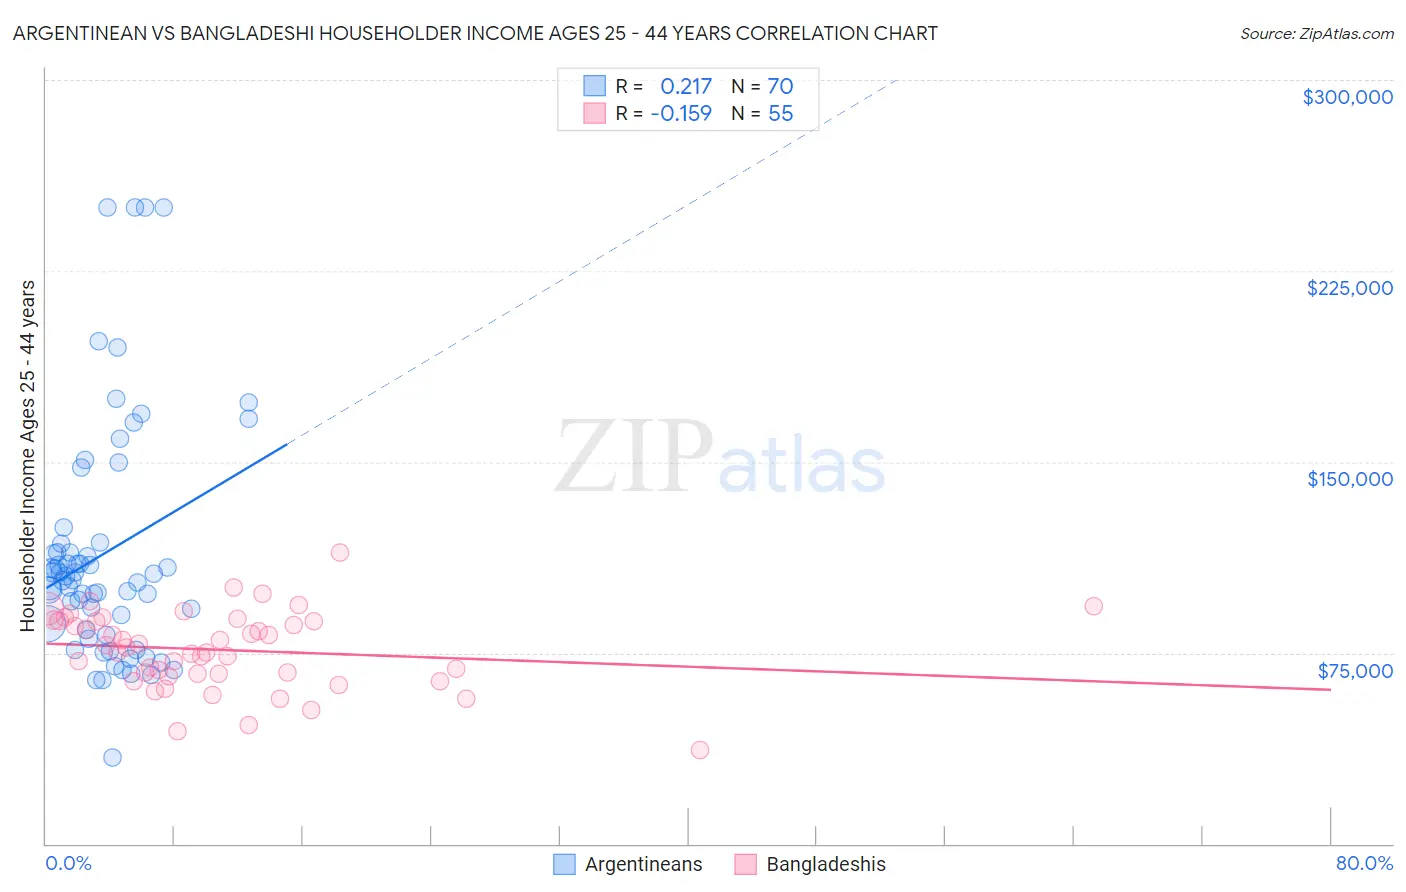 Argentinean vs Bangladeshi Householder Income Ages 25 - 44 years